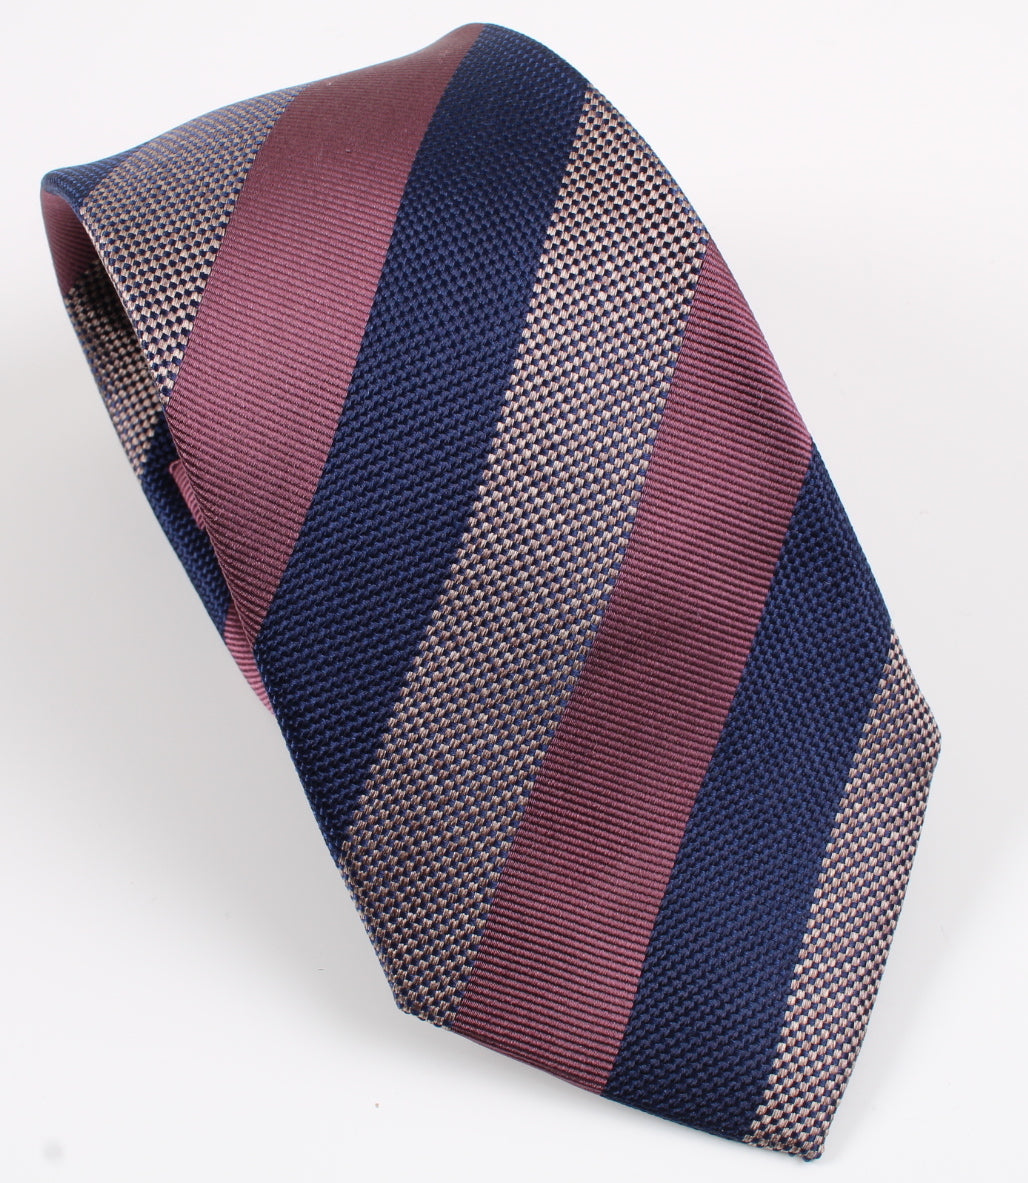 New With Tags SUITSUPPLY Multicolor Stripe 100% Silk Tie